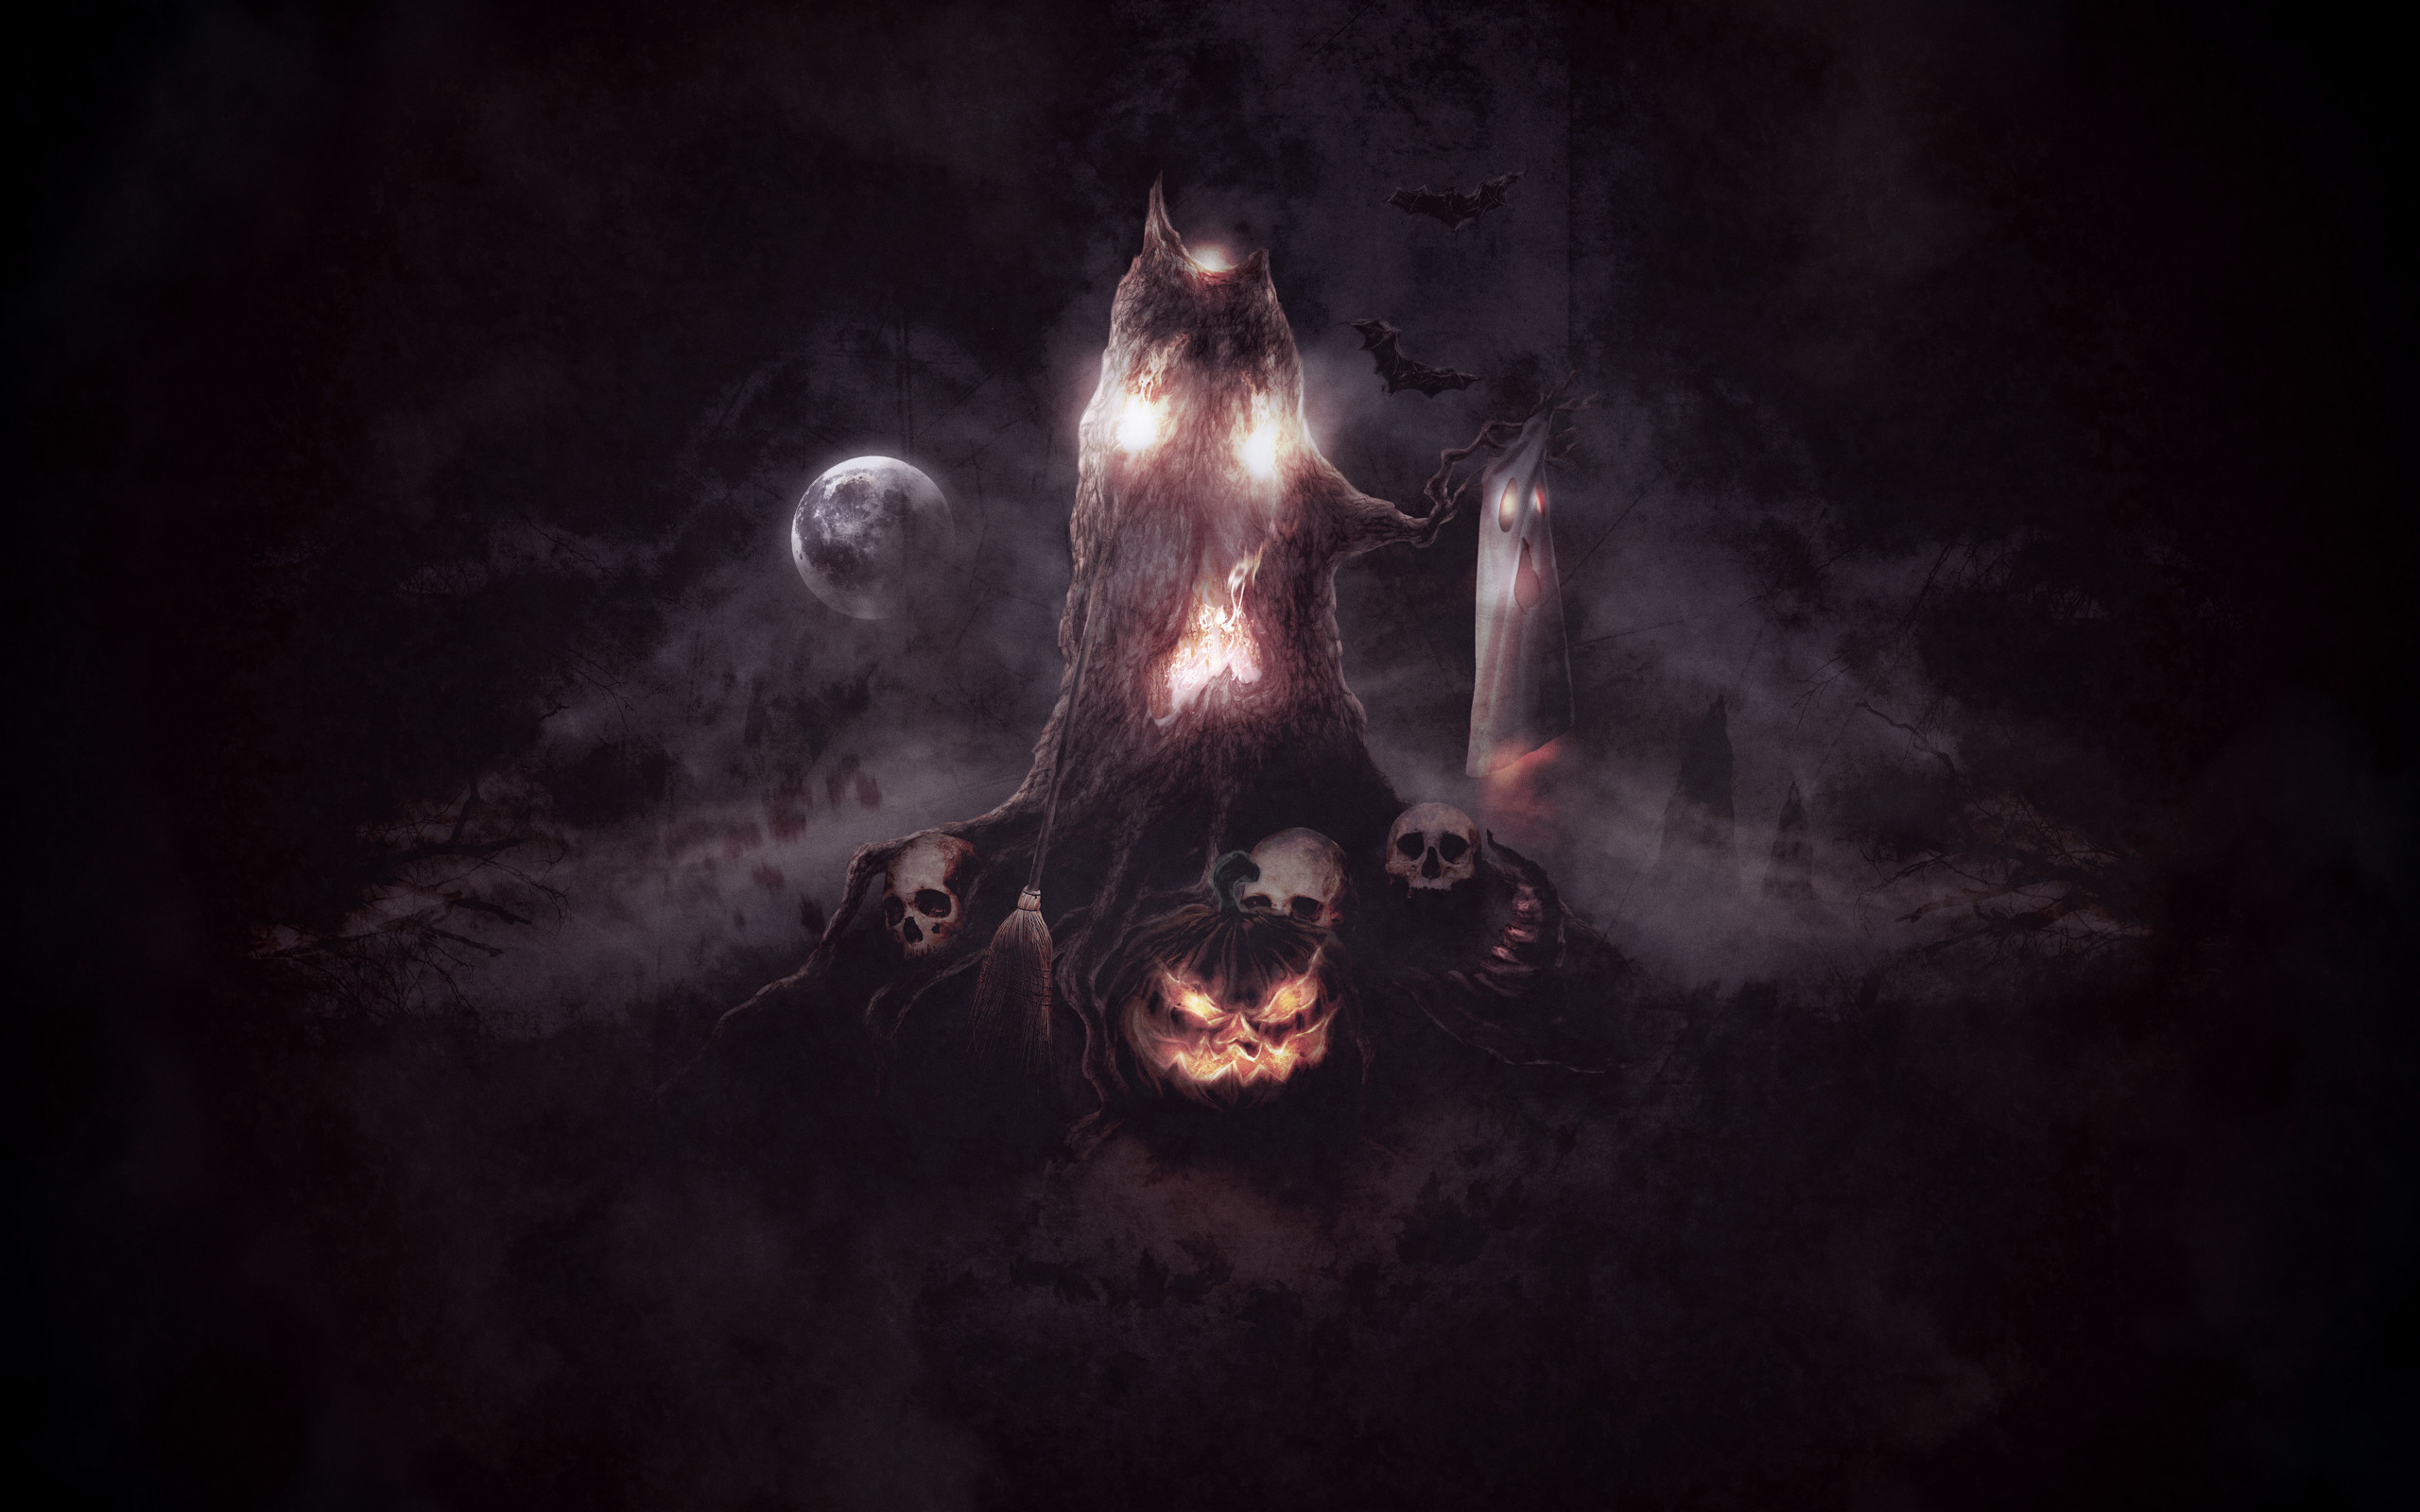 2560x1600 Awesome Scary Animated Halloween Wallpapers in High Quality, Yiannis  Commings